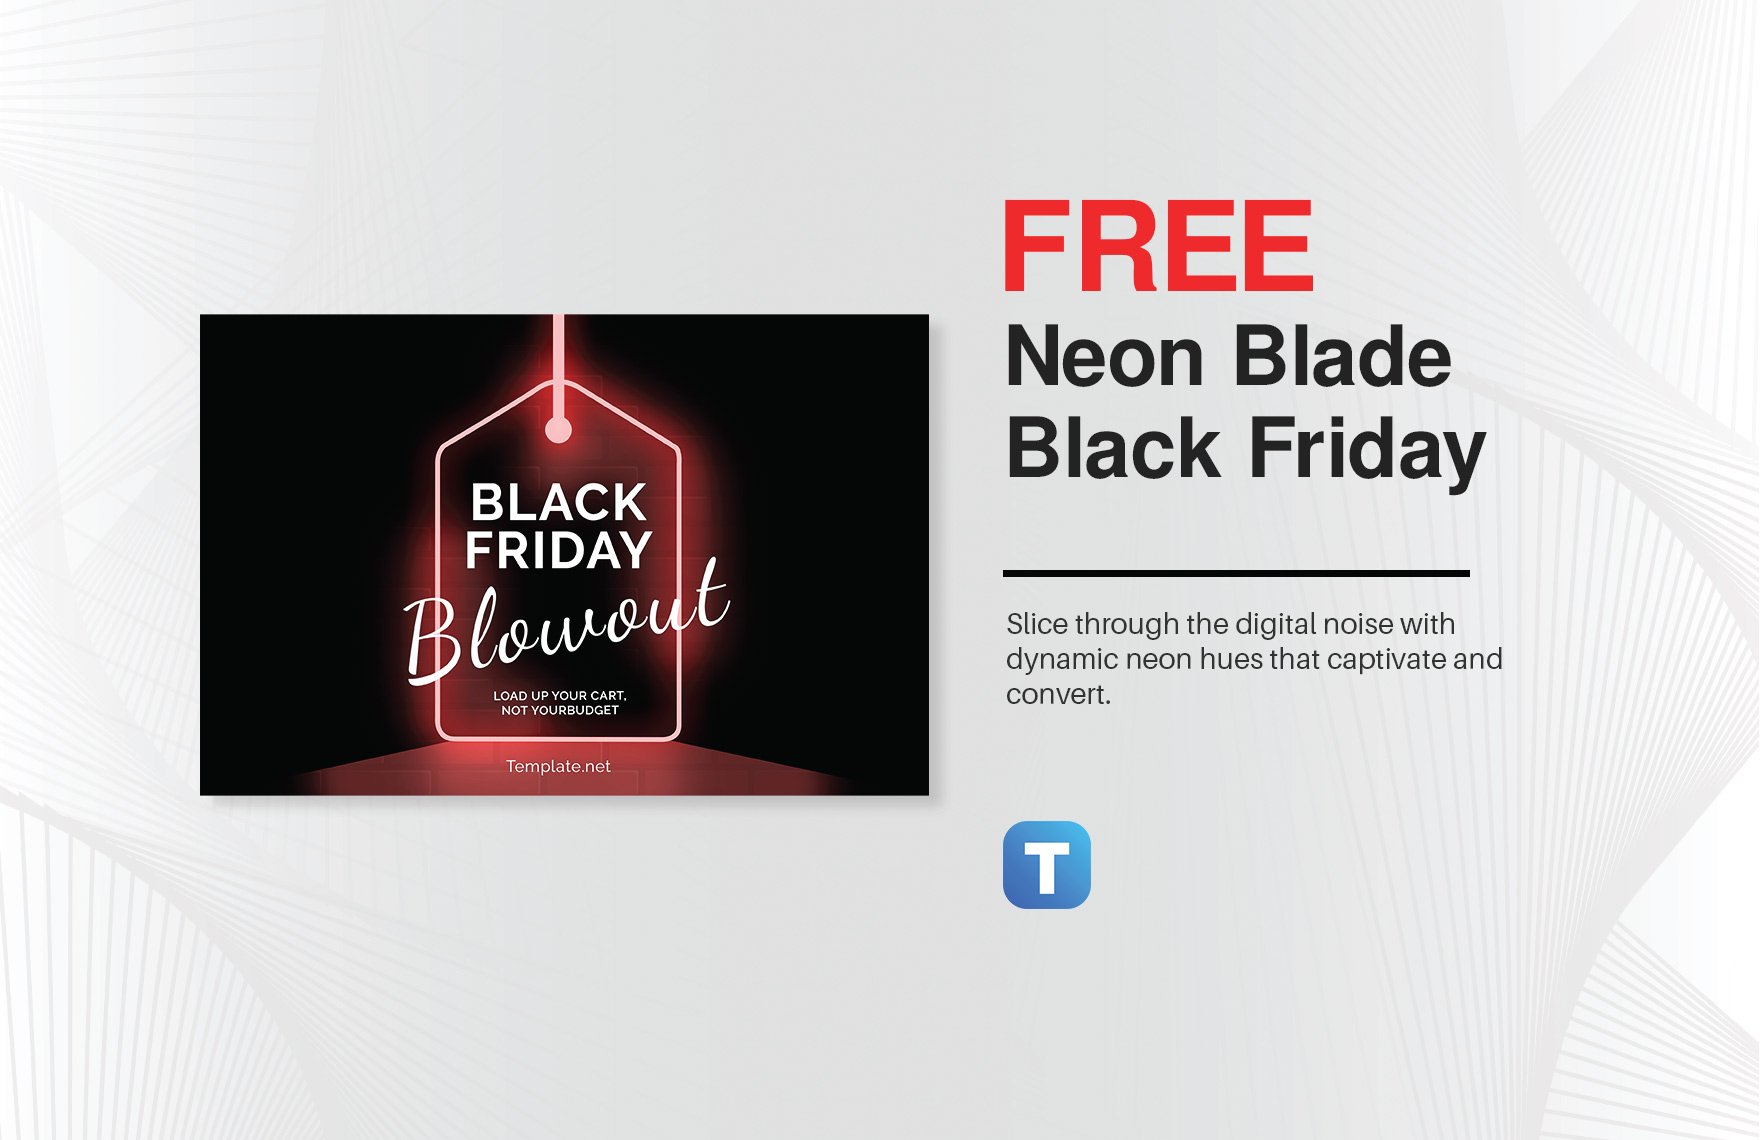 Free Neon Blade Black Friday Banner Template